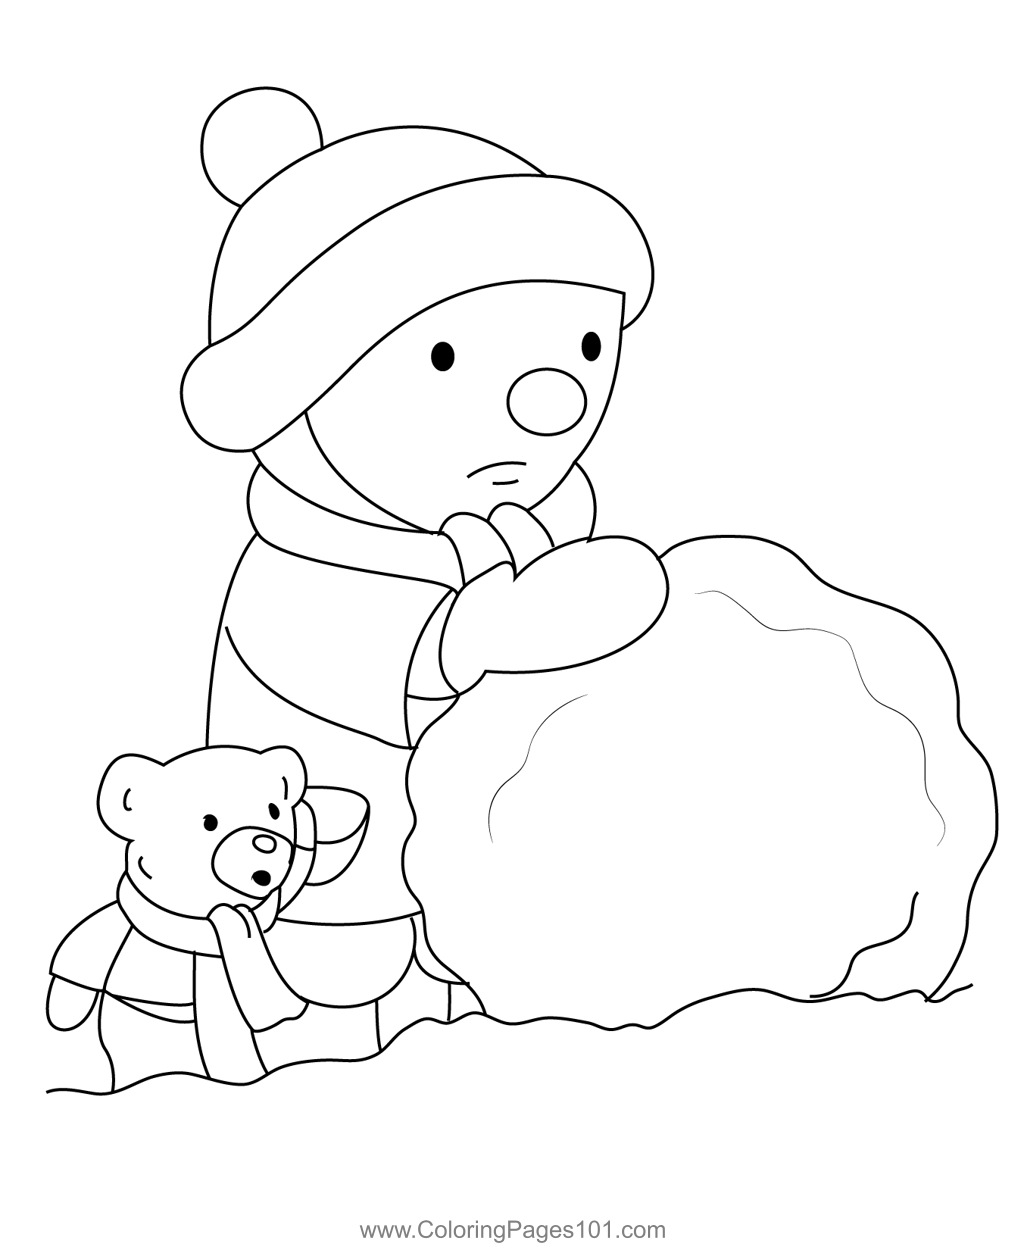 Charley And Mimmo Playing With Snow Coloring Page for Kids - Free ...